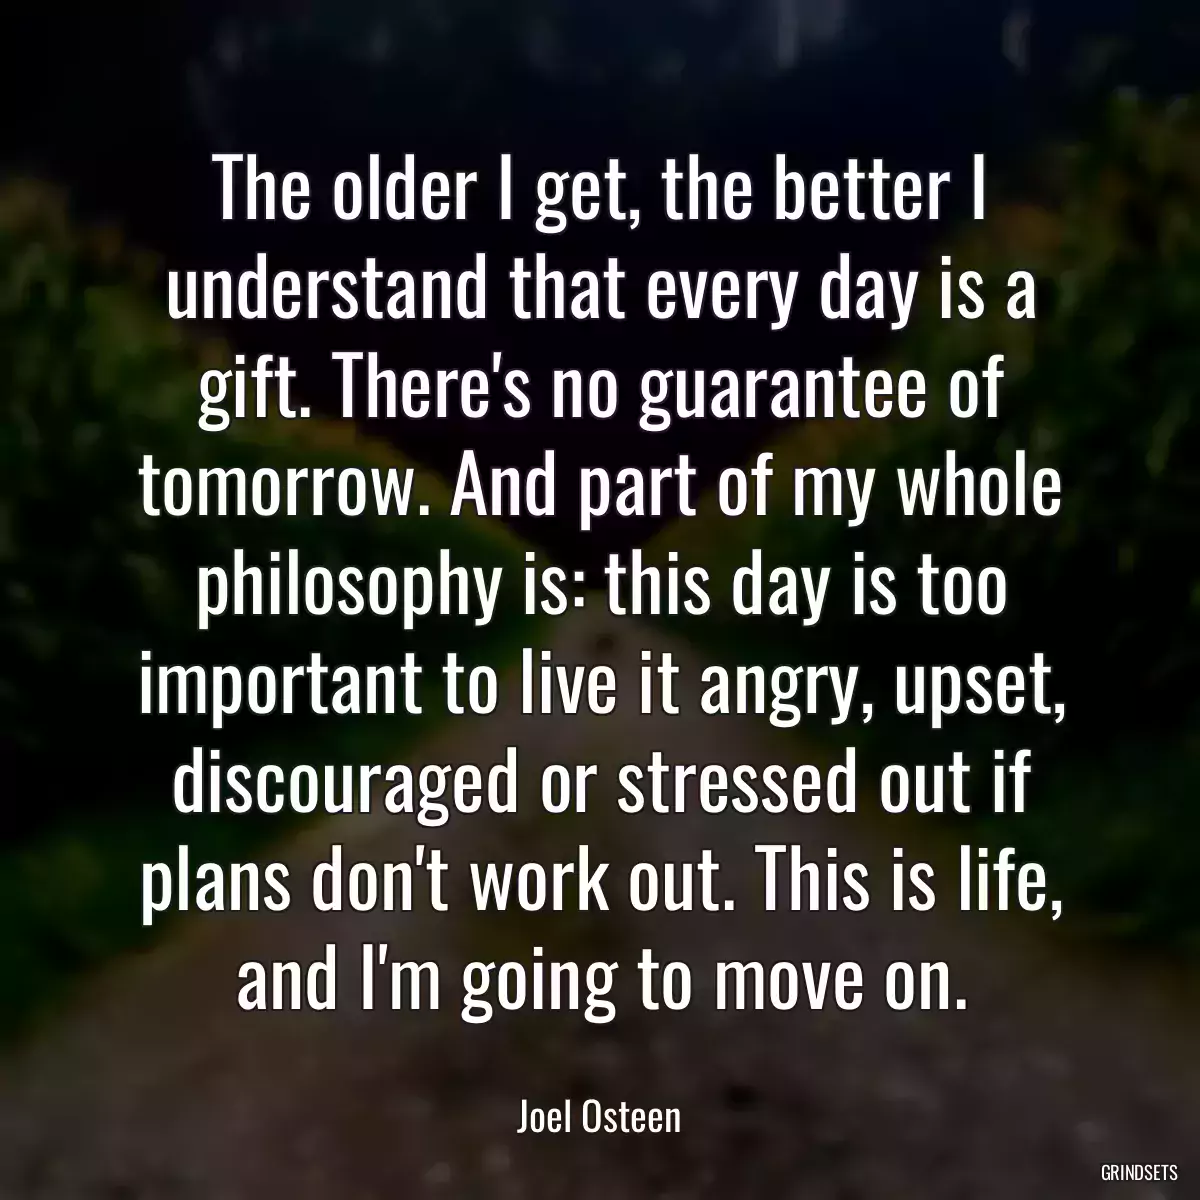 The older I get, the better I understand that every day is a gift. There\'s no guarantee of tomorrow. And part of my whole philosophy is: this day is too important to live it angry, upset, discouraged or stressed out if plans don\'t work out. This is life, and I\'m going to move on.